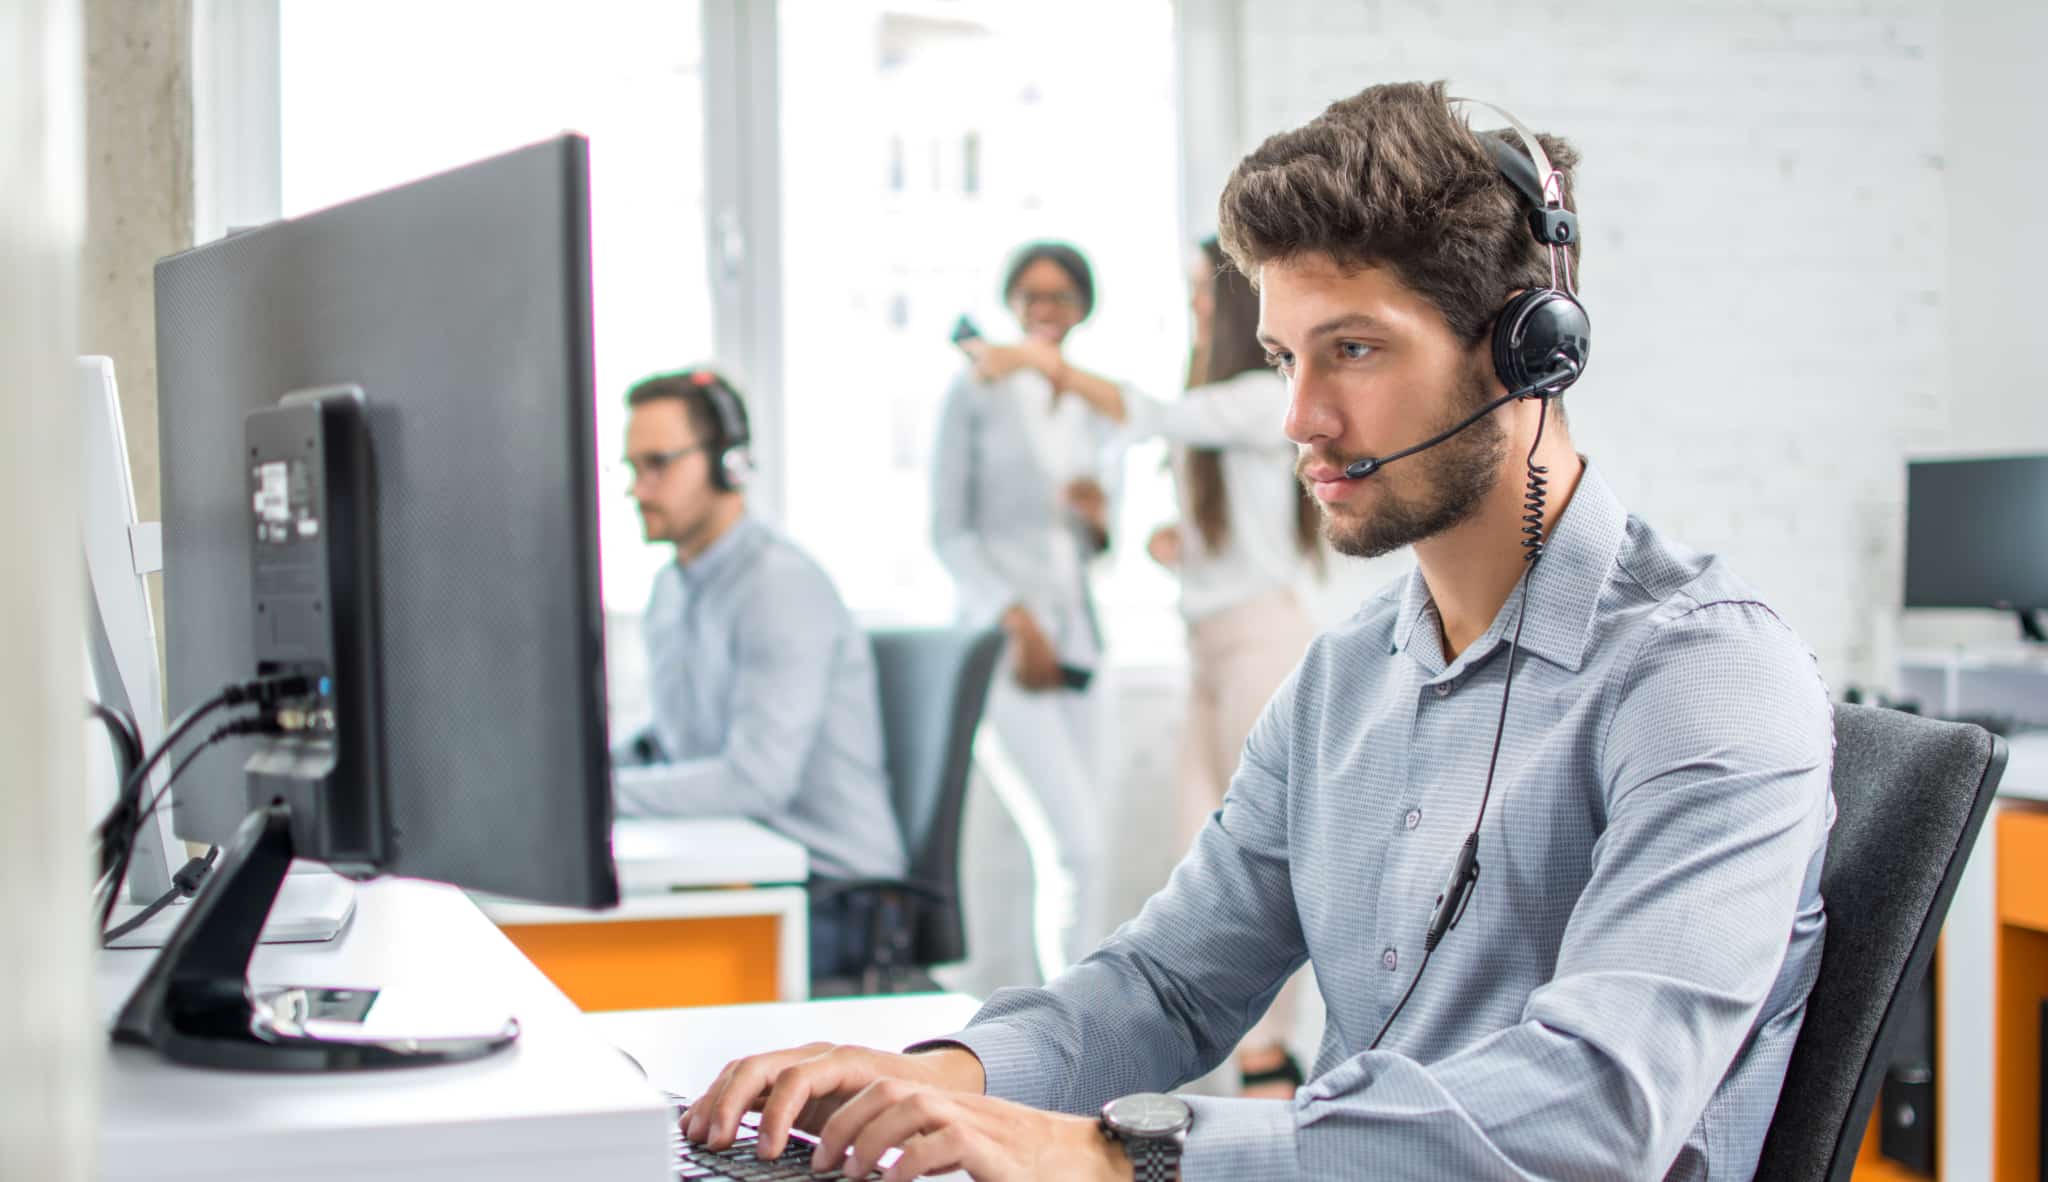 IT technician using headset while on computer